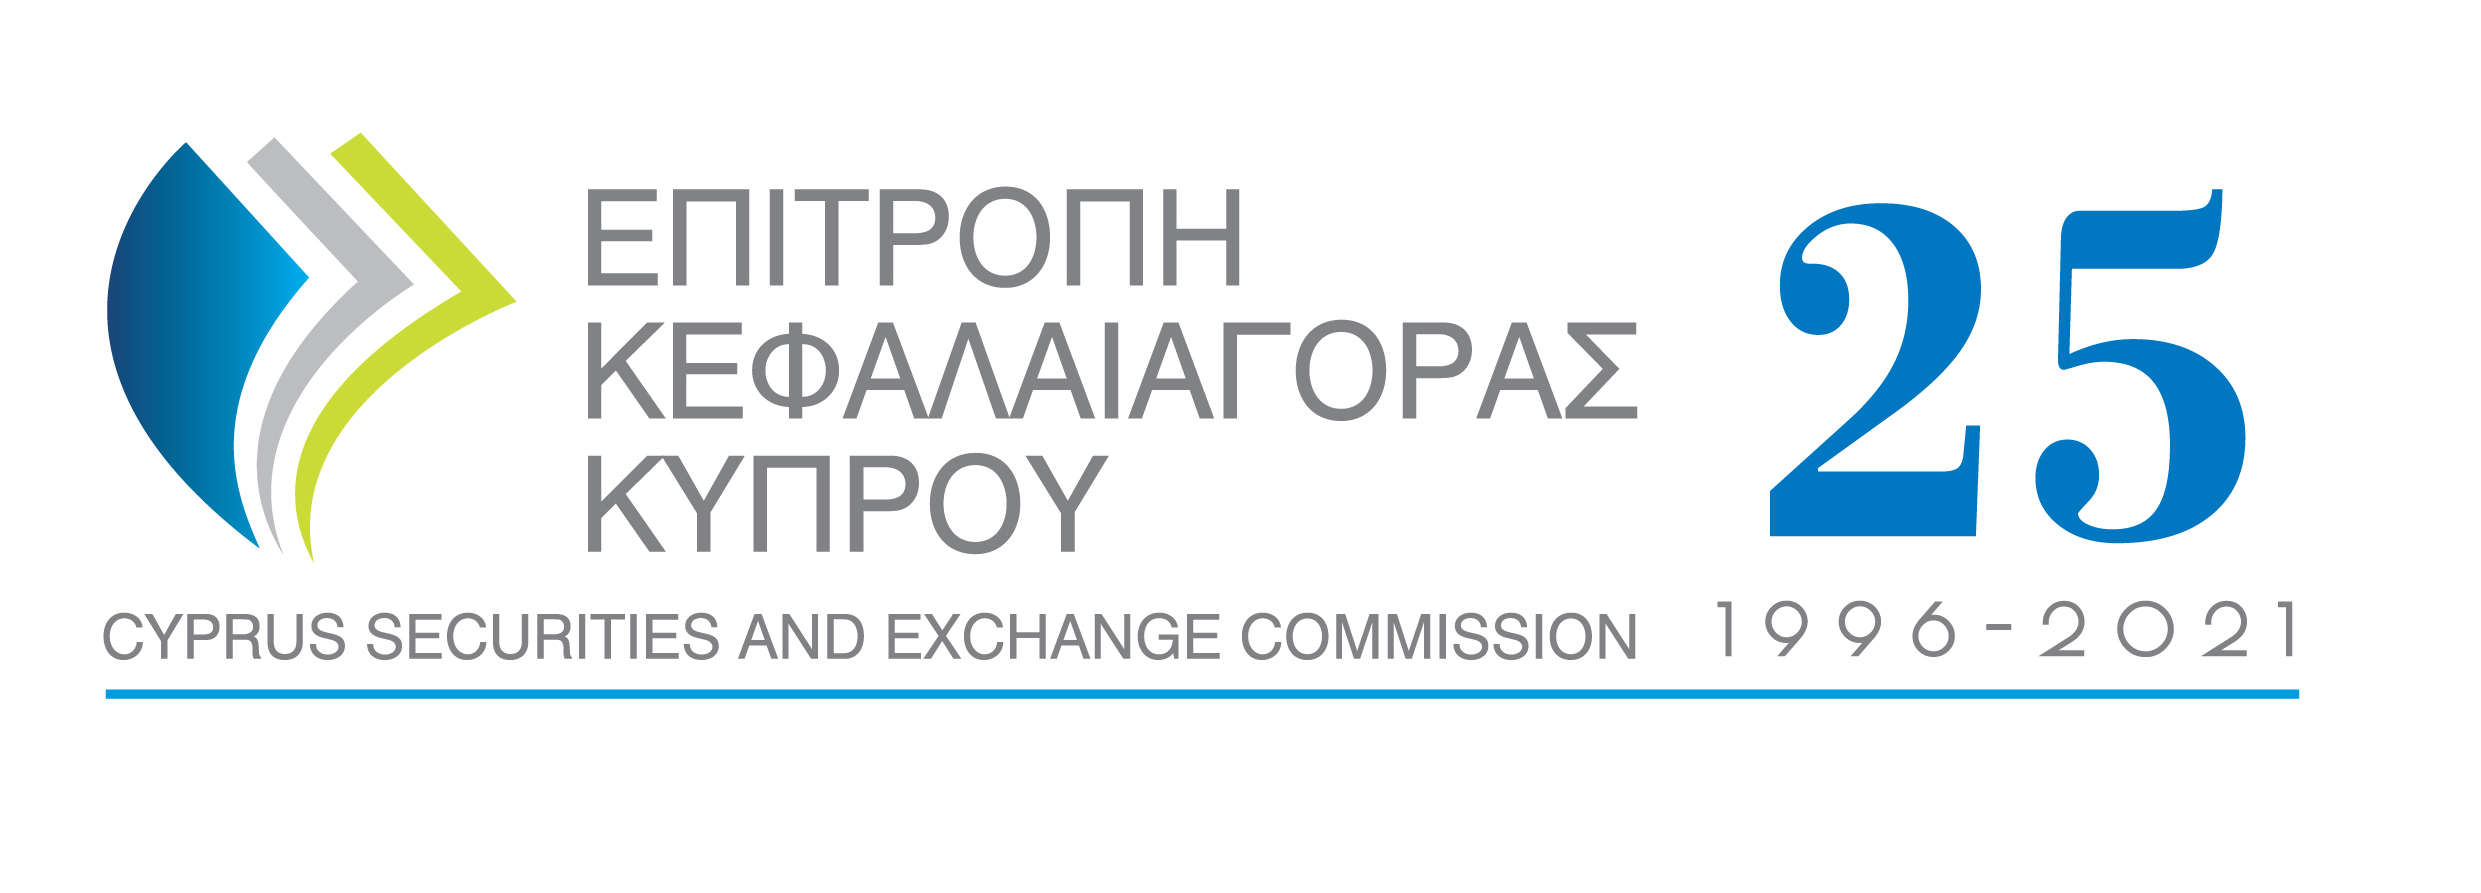 The Cyprus Securities and Exchange Commission